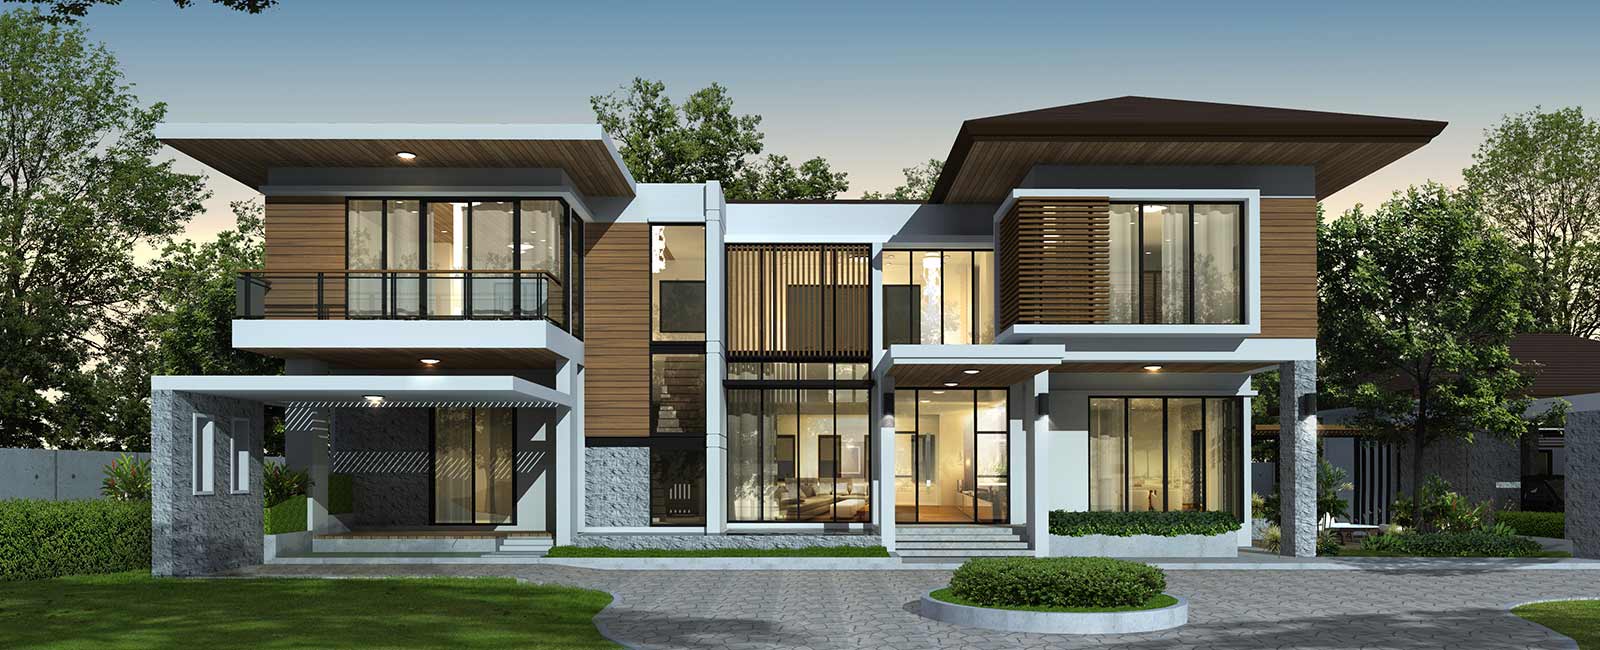 Prefab Homes Readymade Prefabricated Houses in India